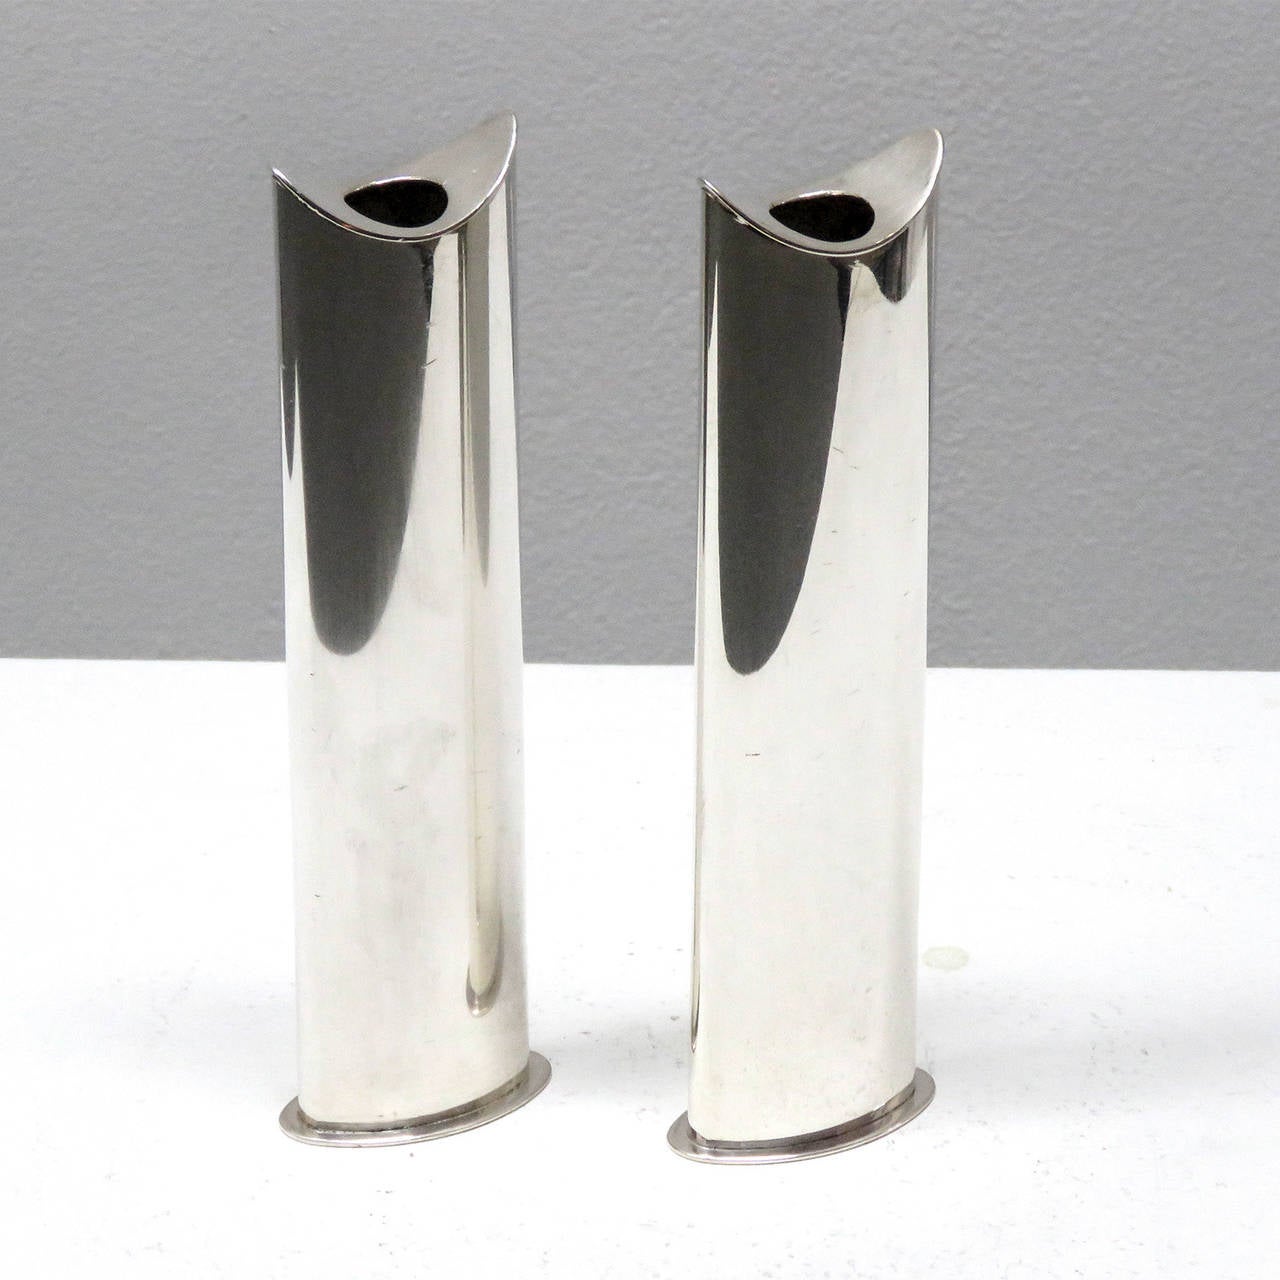 stunning silver plated Giselle bud vases/candle holders by Lino Sabattini, marked 